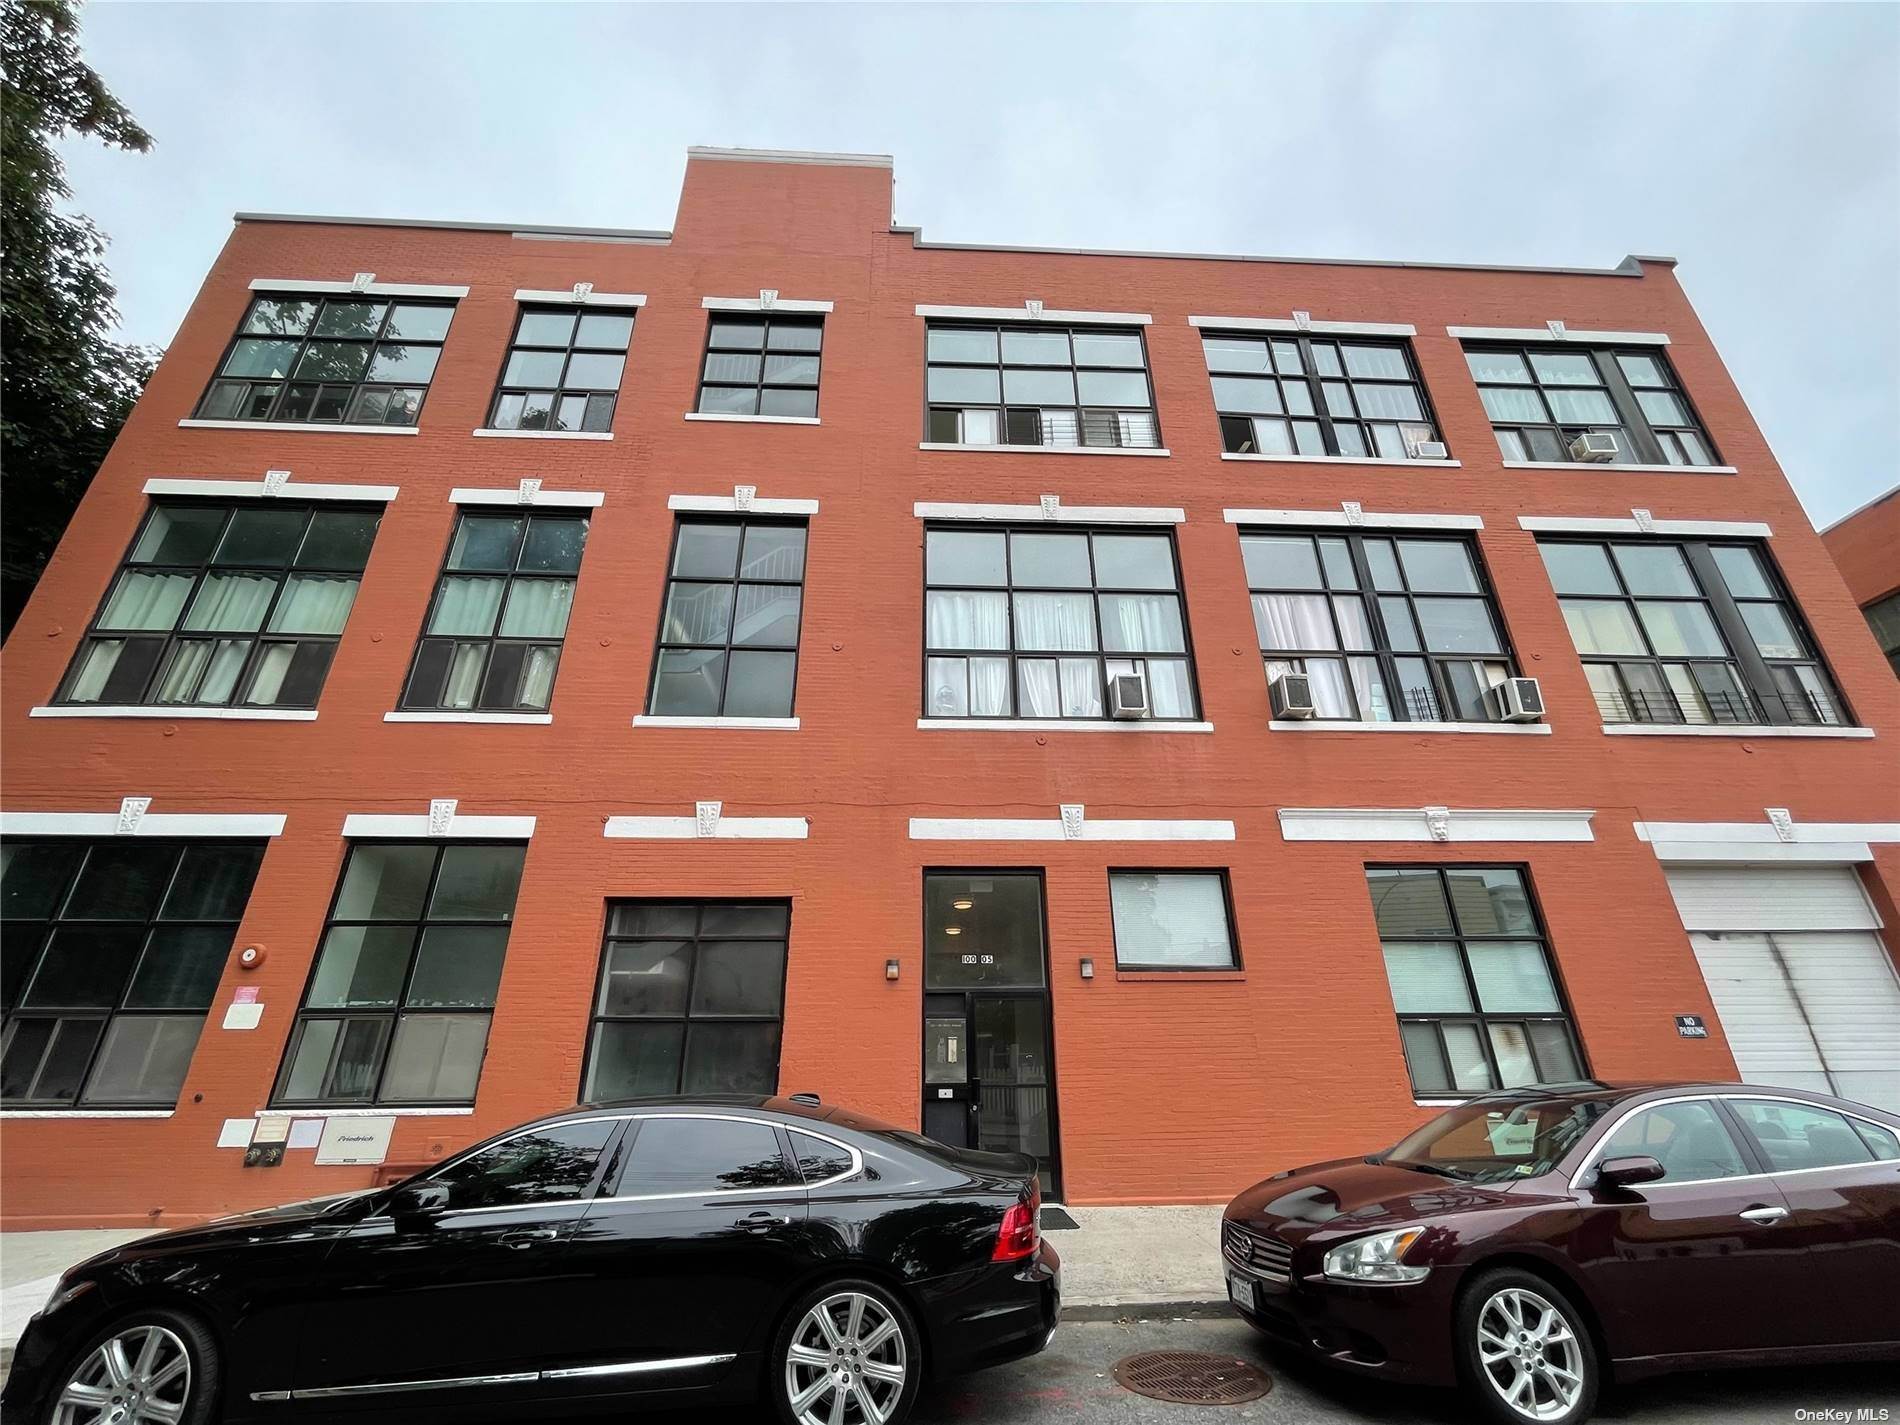 2. Residential Lease at 100-05 92nd Avenue # 208 Richmond Hill, New York 11418 United States